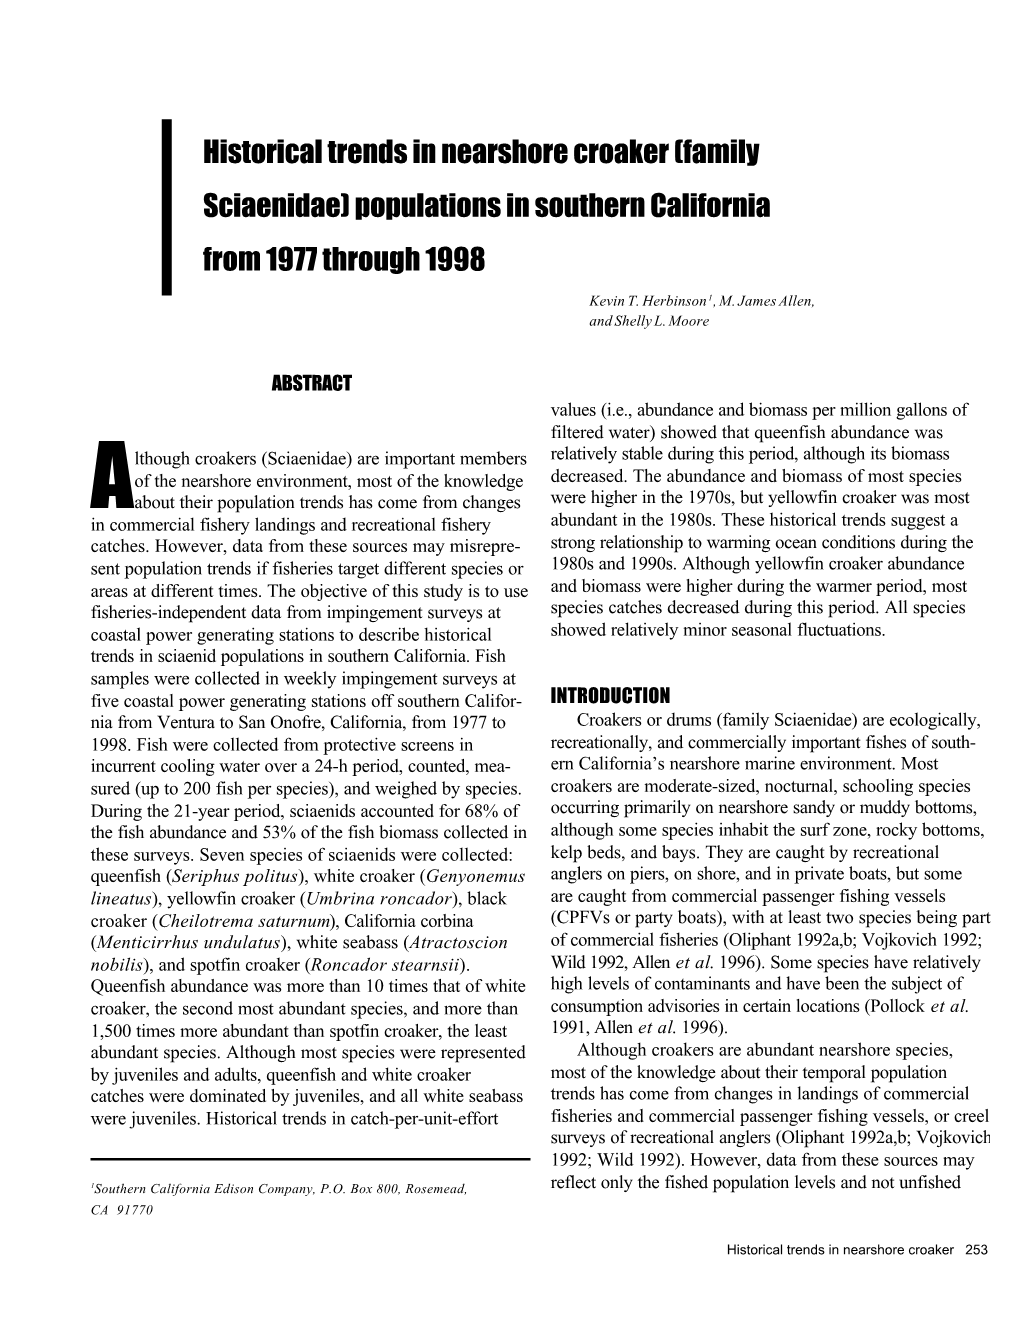 Historical Trends in Nearshore Croaker (Family Sciaenidae) Populations in Southern California from 1977 Through 1998